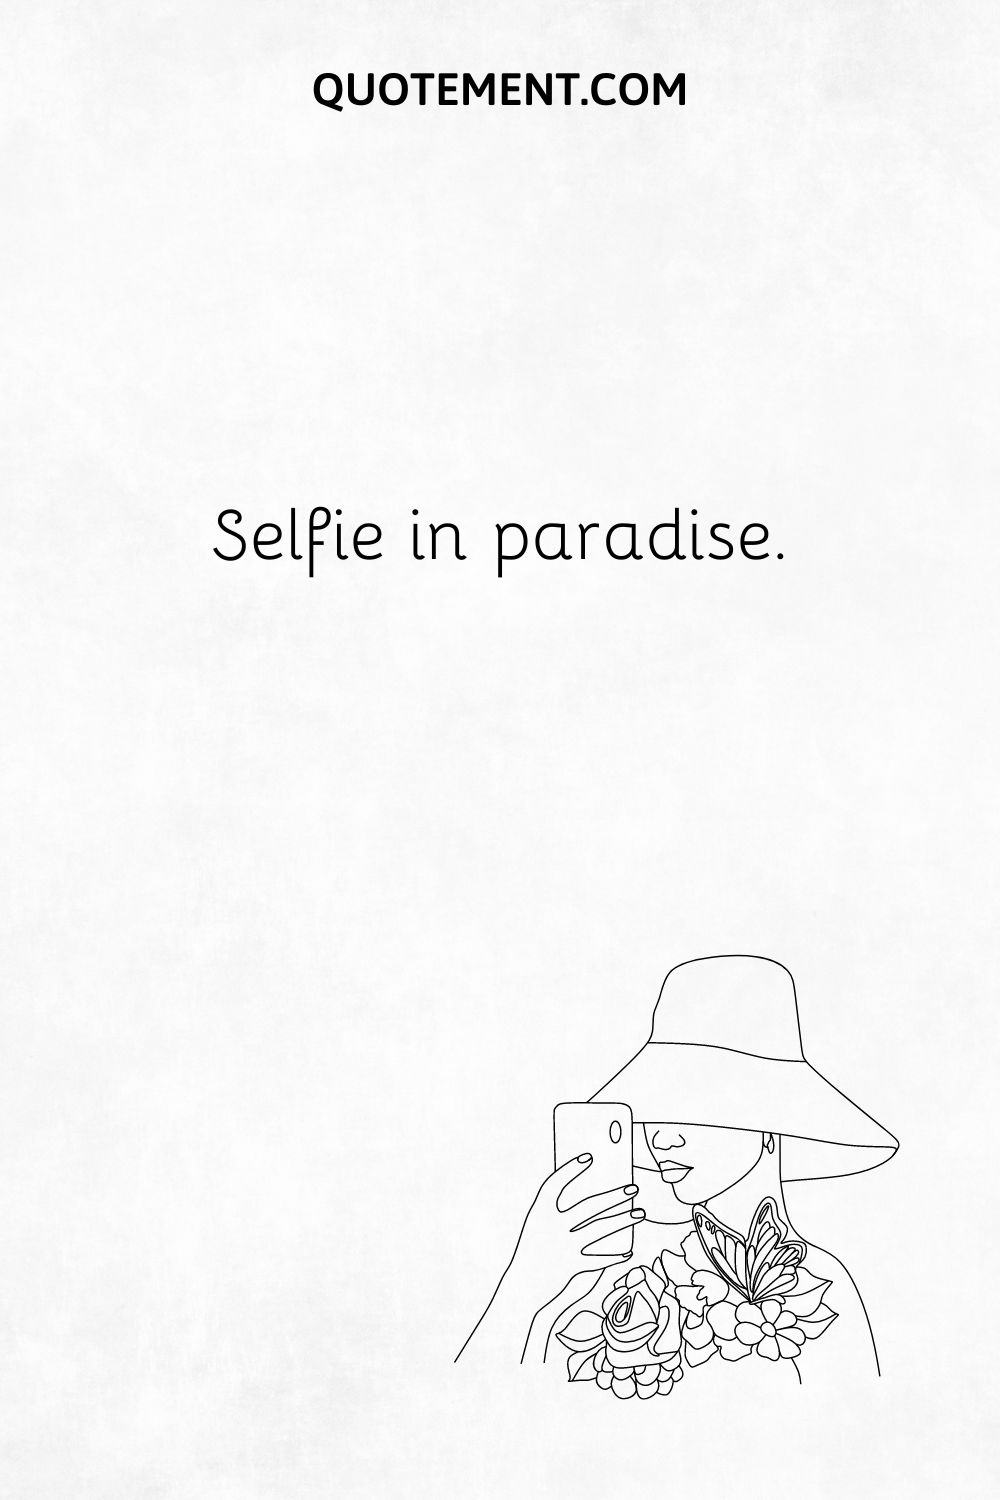 Illustration representing an Ig caption and selfie-taking.